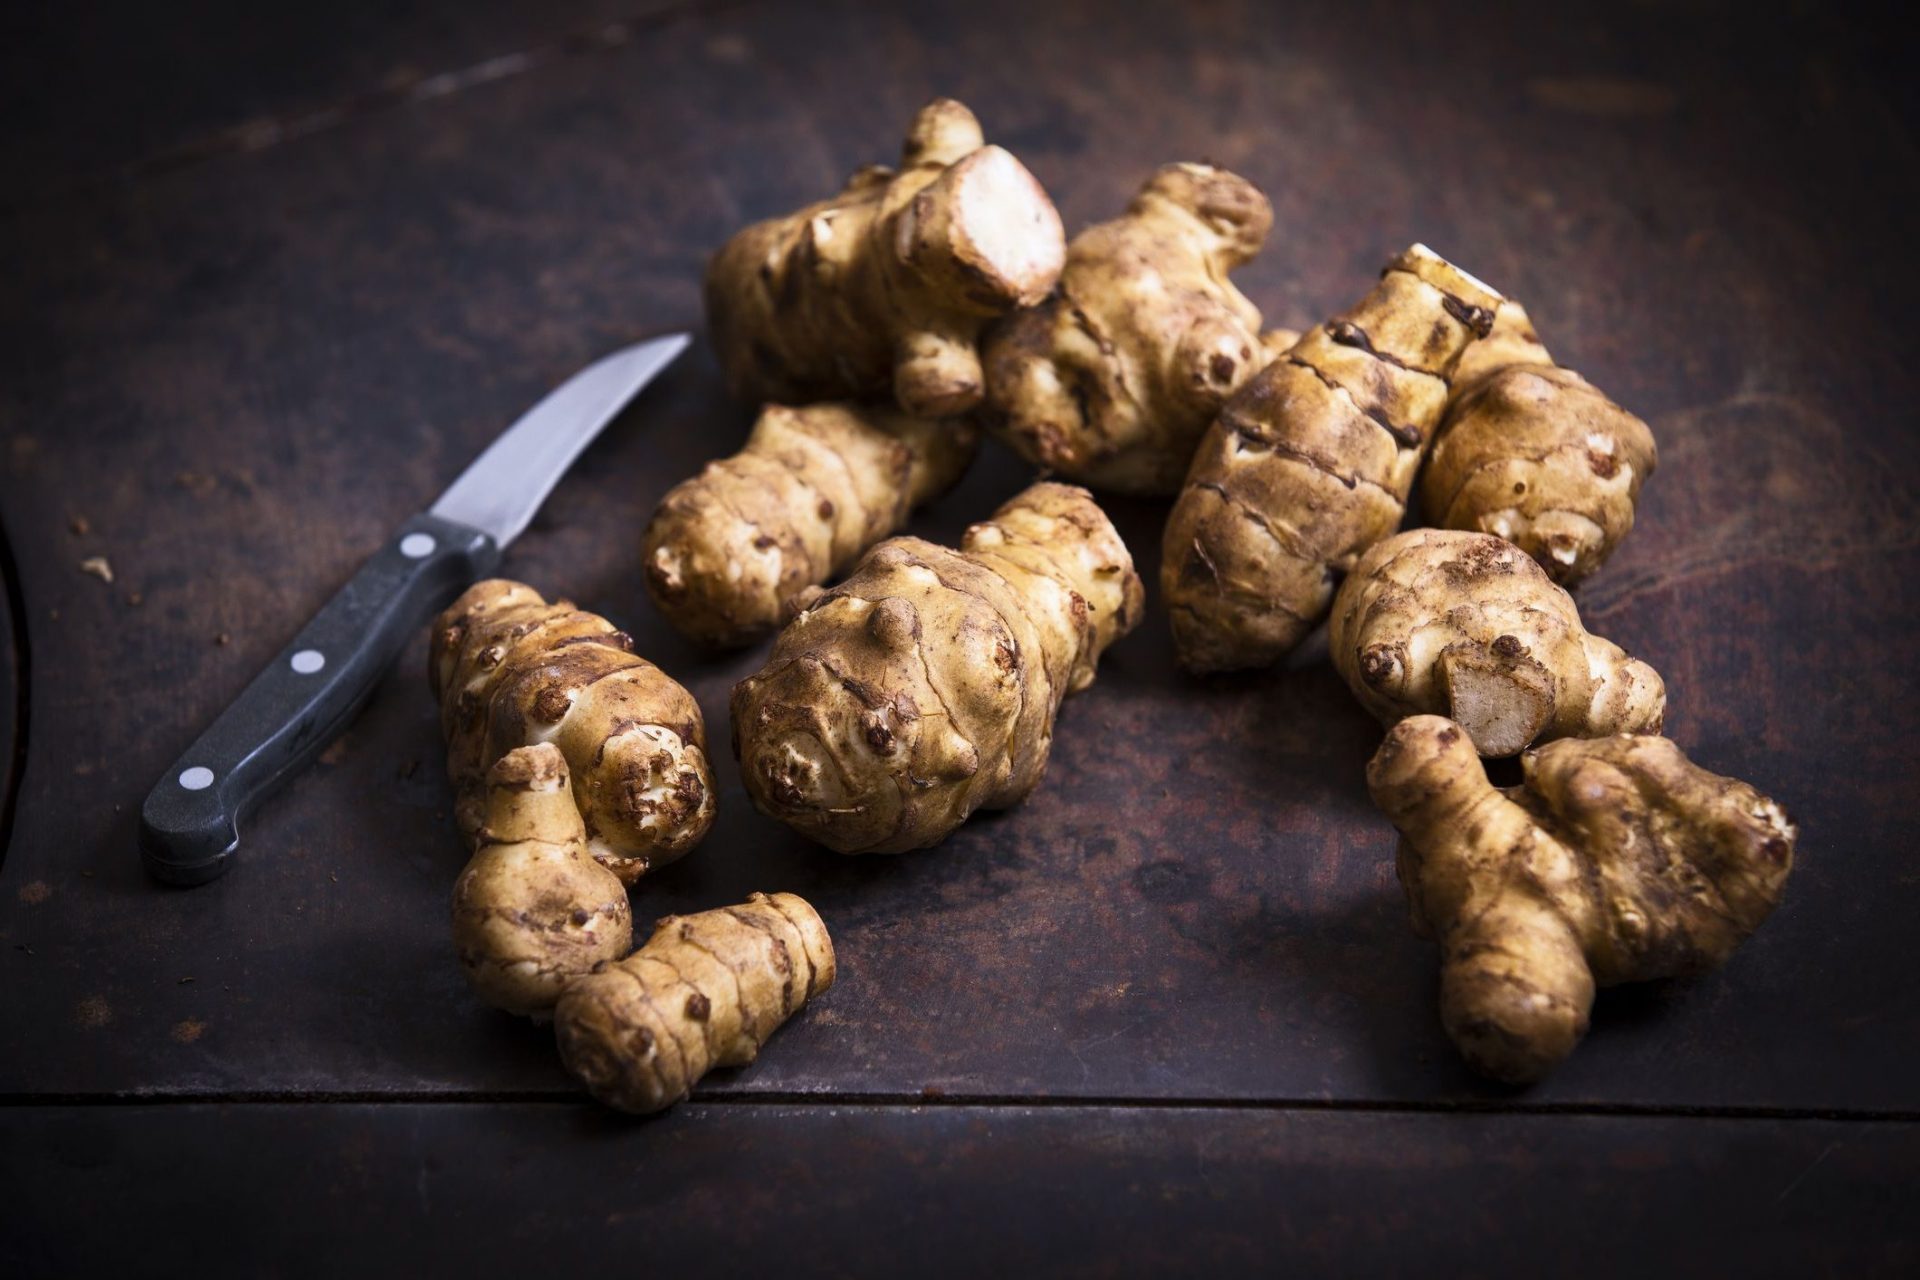 water chestnut substitute, substitute for water chestnuts, chestnut substitute, water chestnuts substitute, water chestnut replacement, jerusalem artichokes